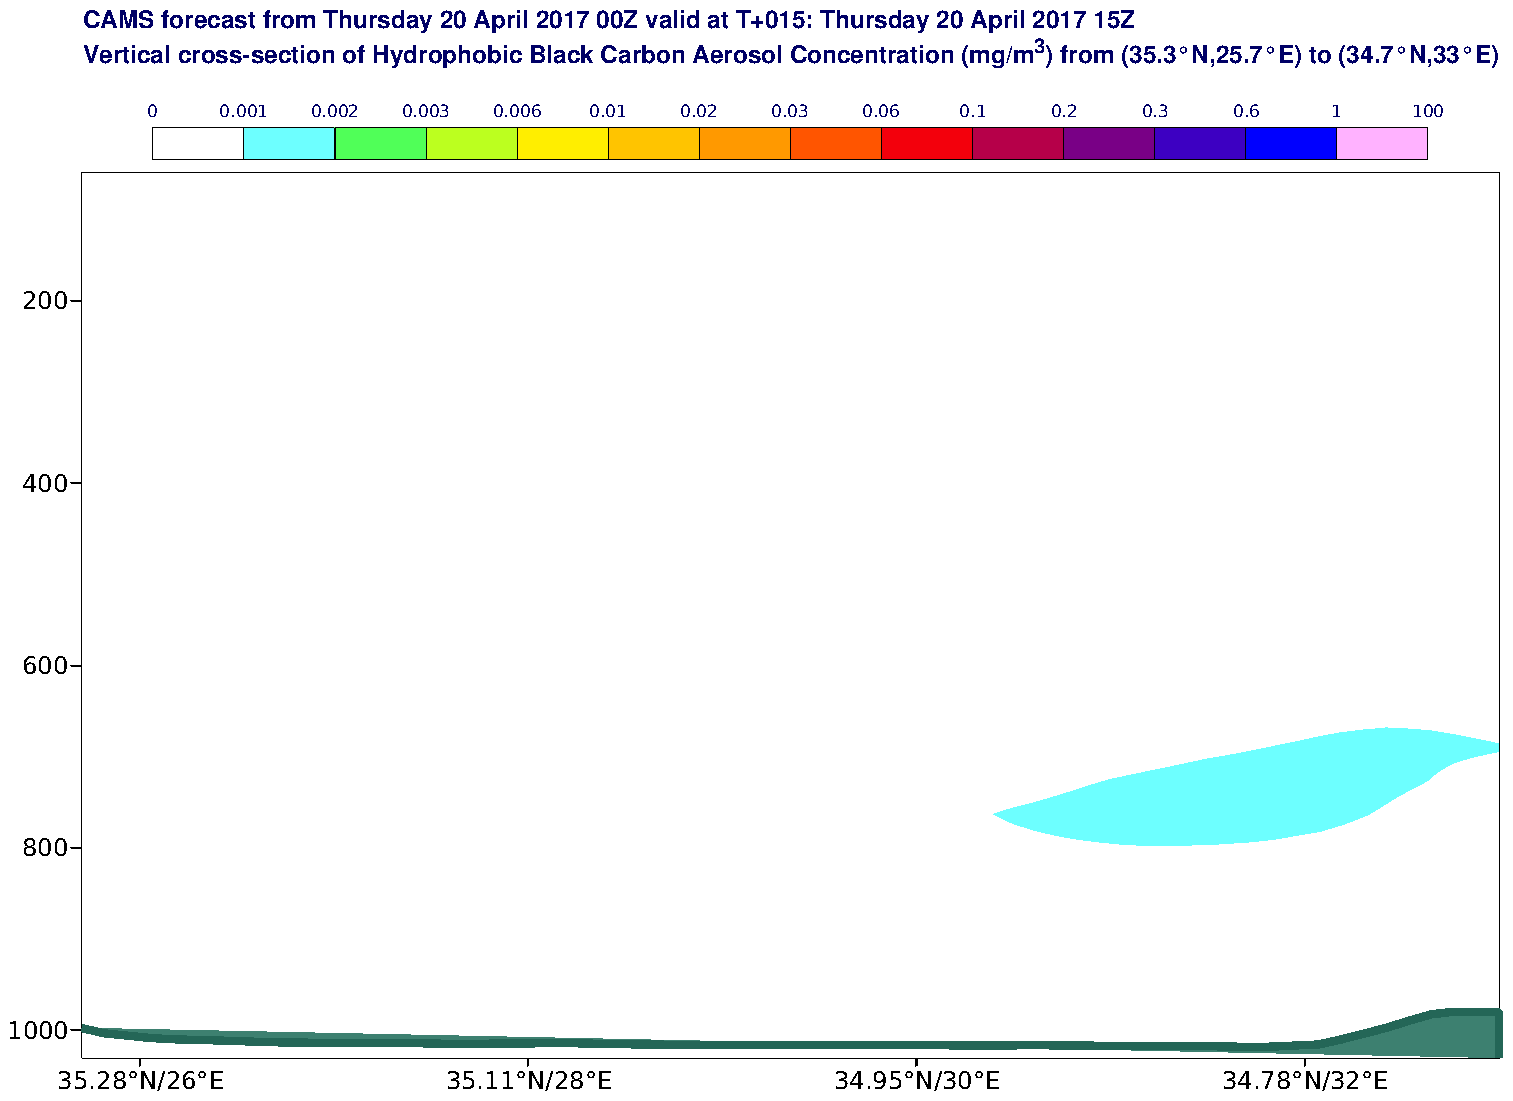 Vertical cross-section of Hydrophobic Black Carbon Aerosol Concentration (mg/m3) valid at T15 - 2017-04-20 15:00